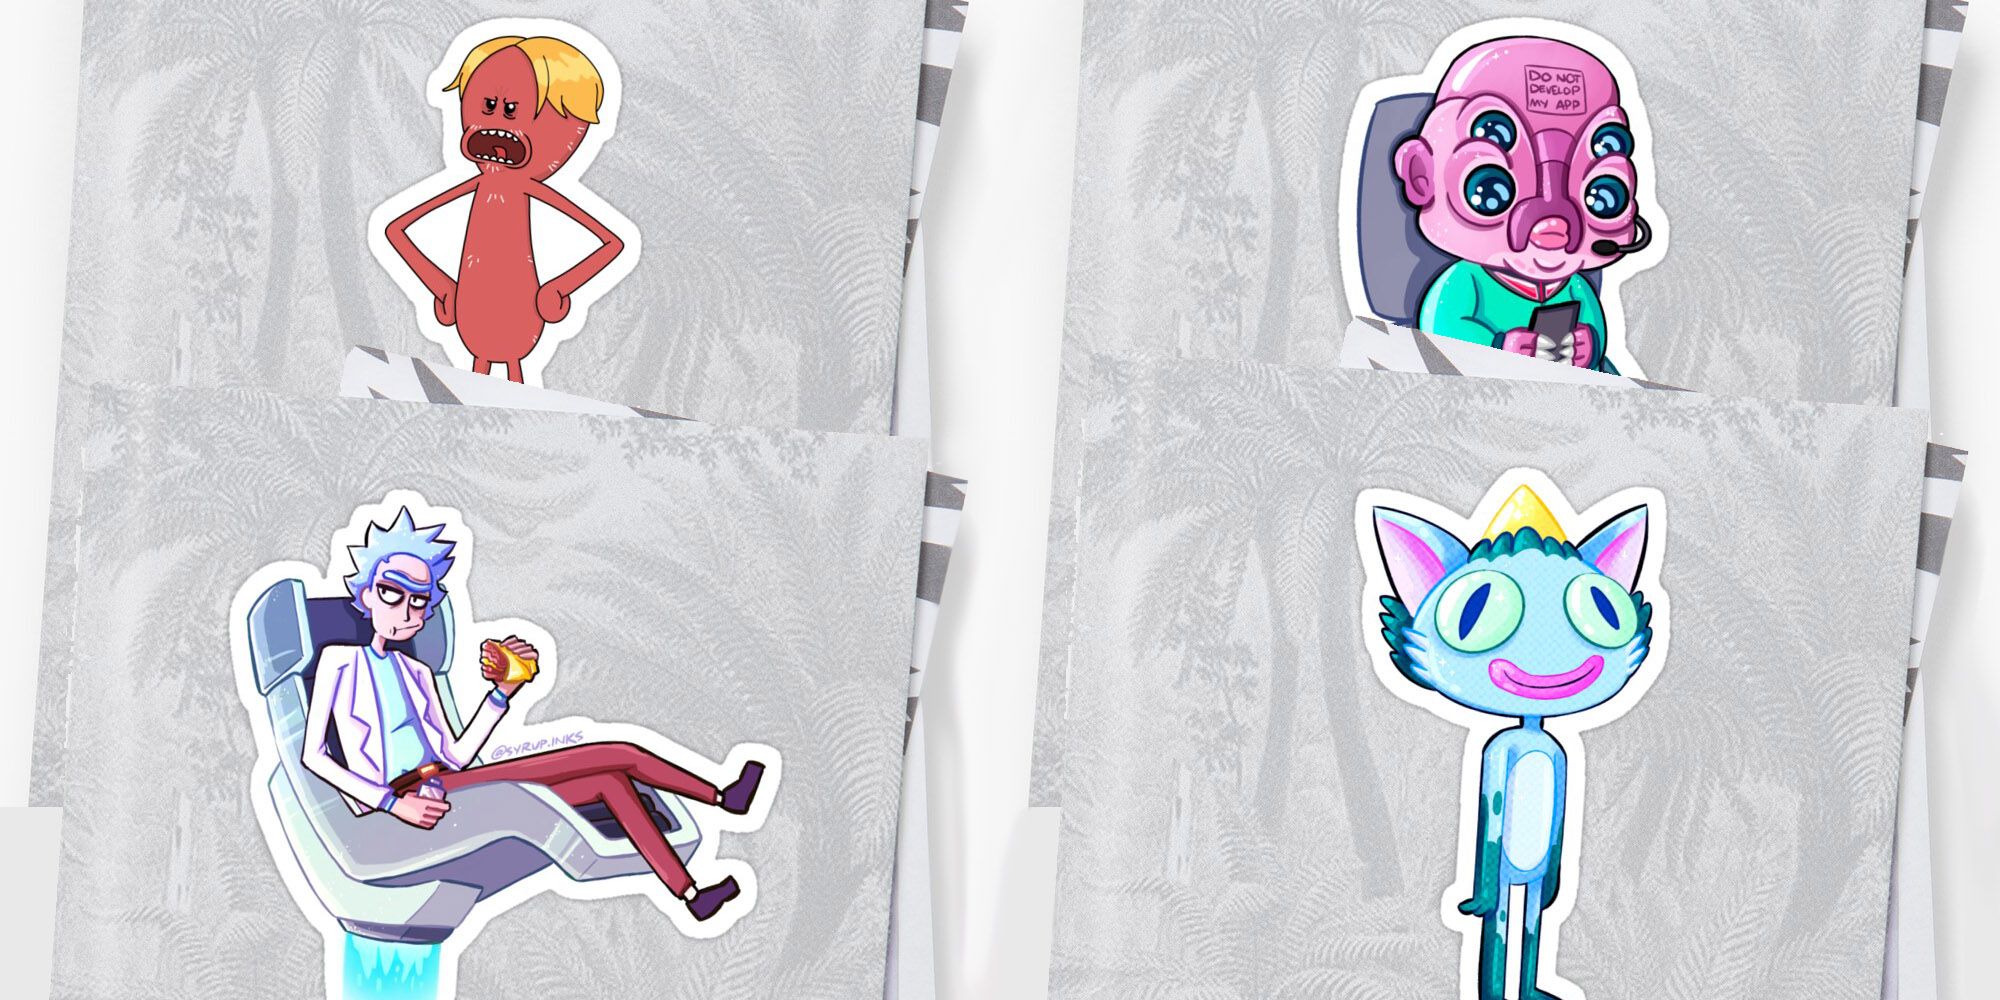 Rick and Morty Redbubble Giveaway Stickers